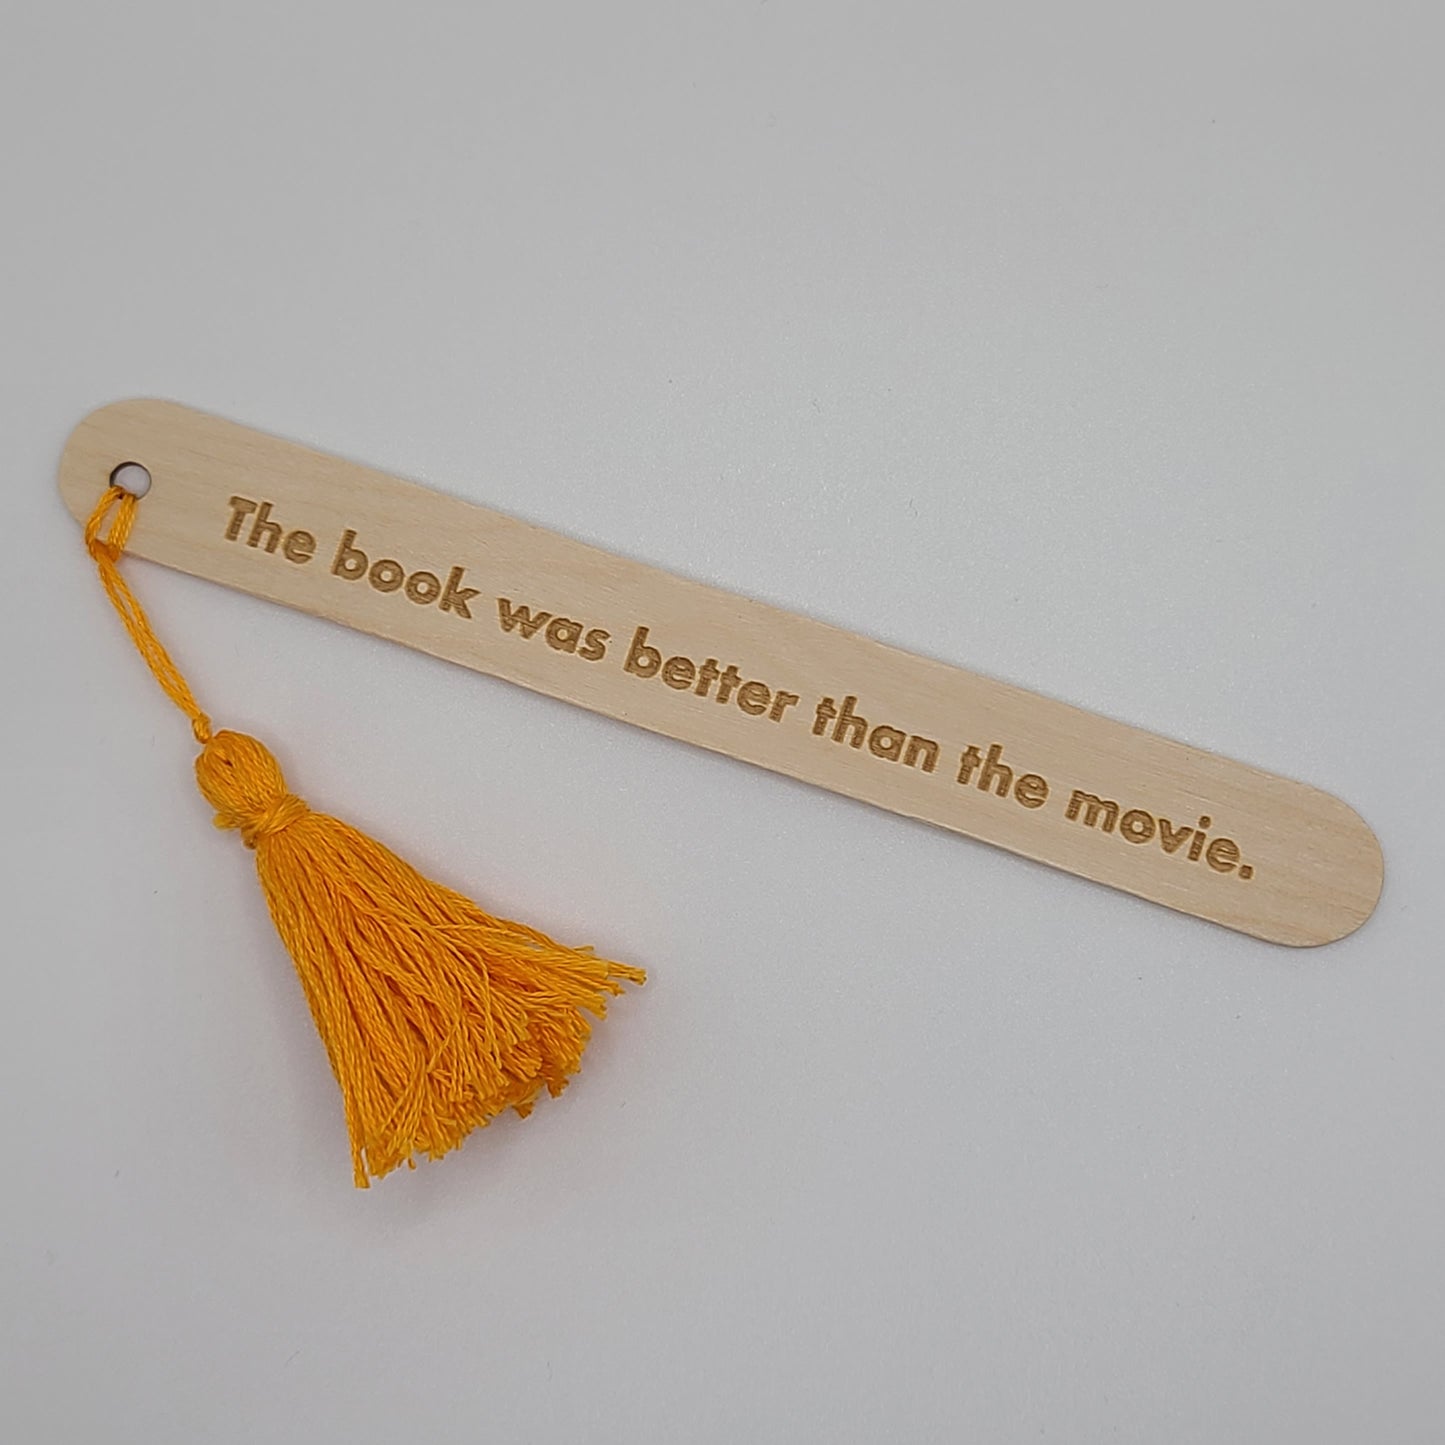 "The book was better than the movie" popsicle bookmark